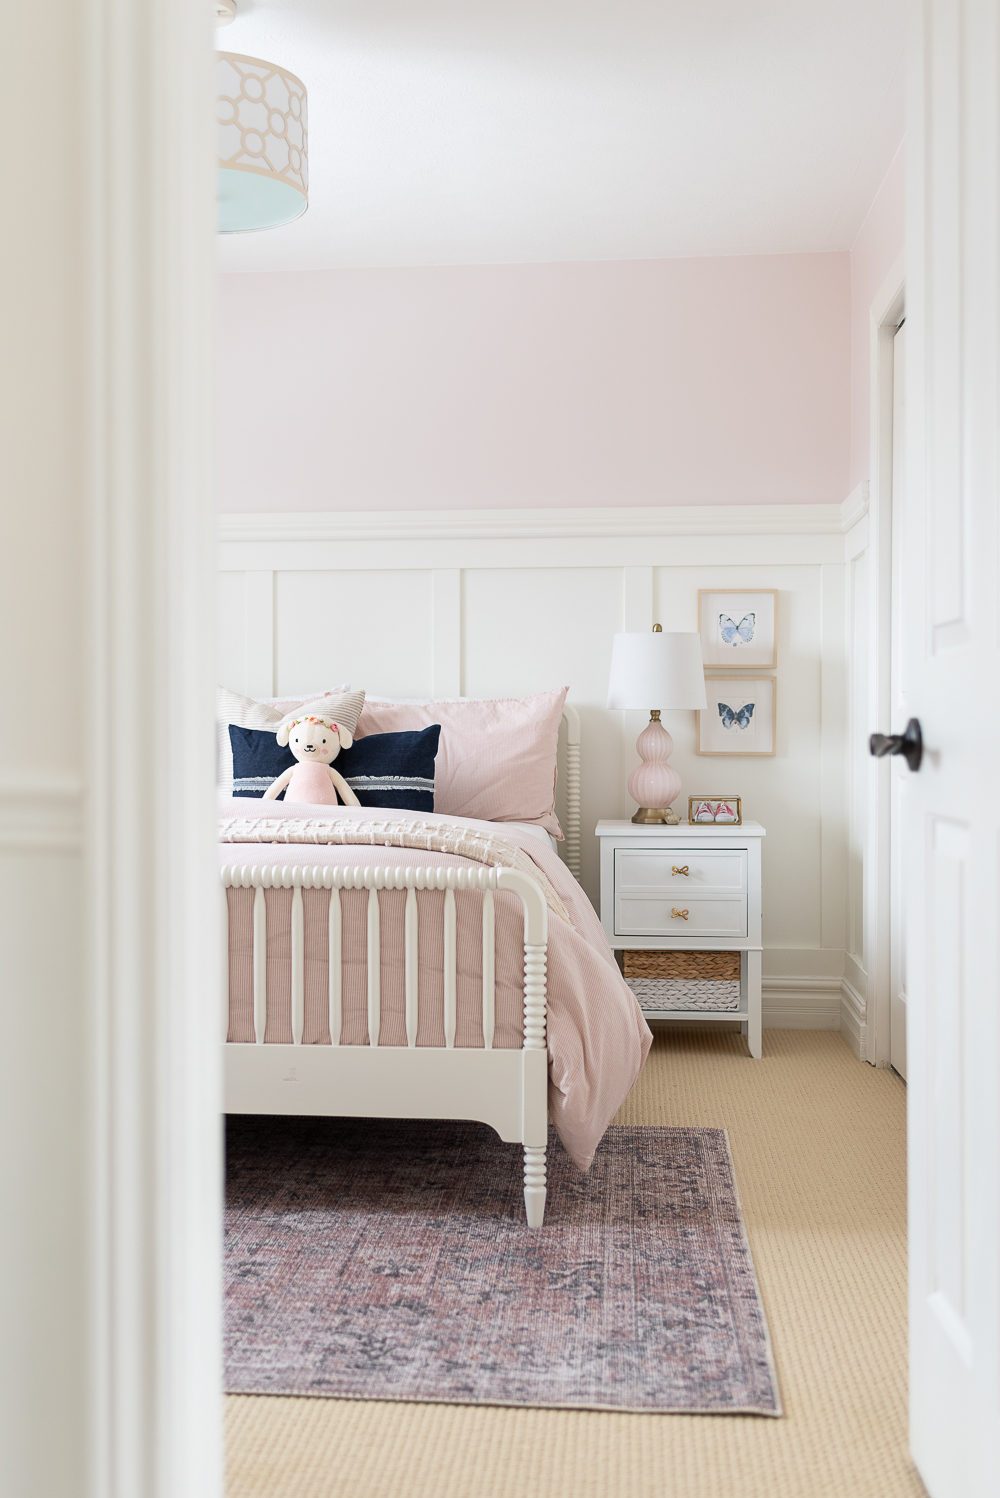 Baby Soft, Classic Pink Paint Color